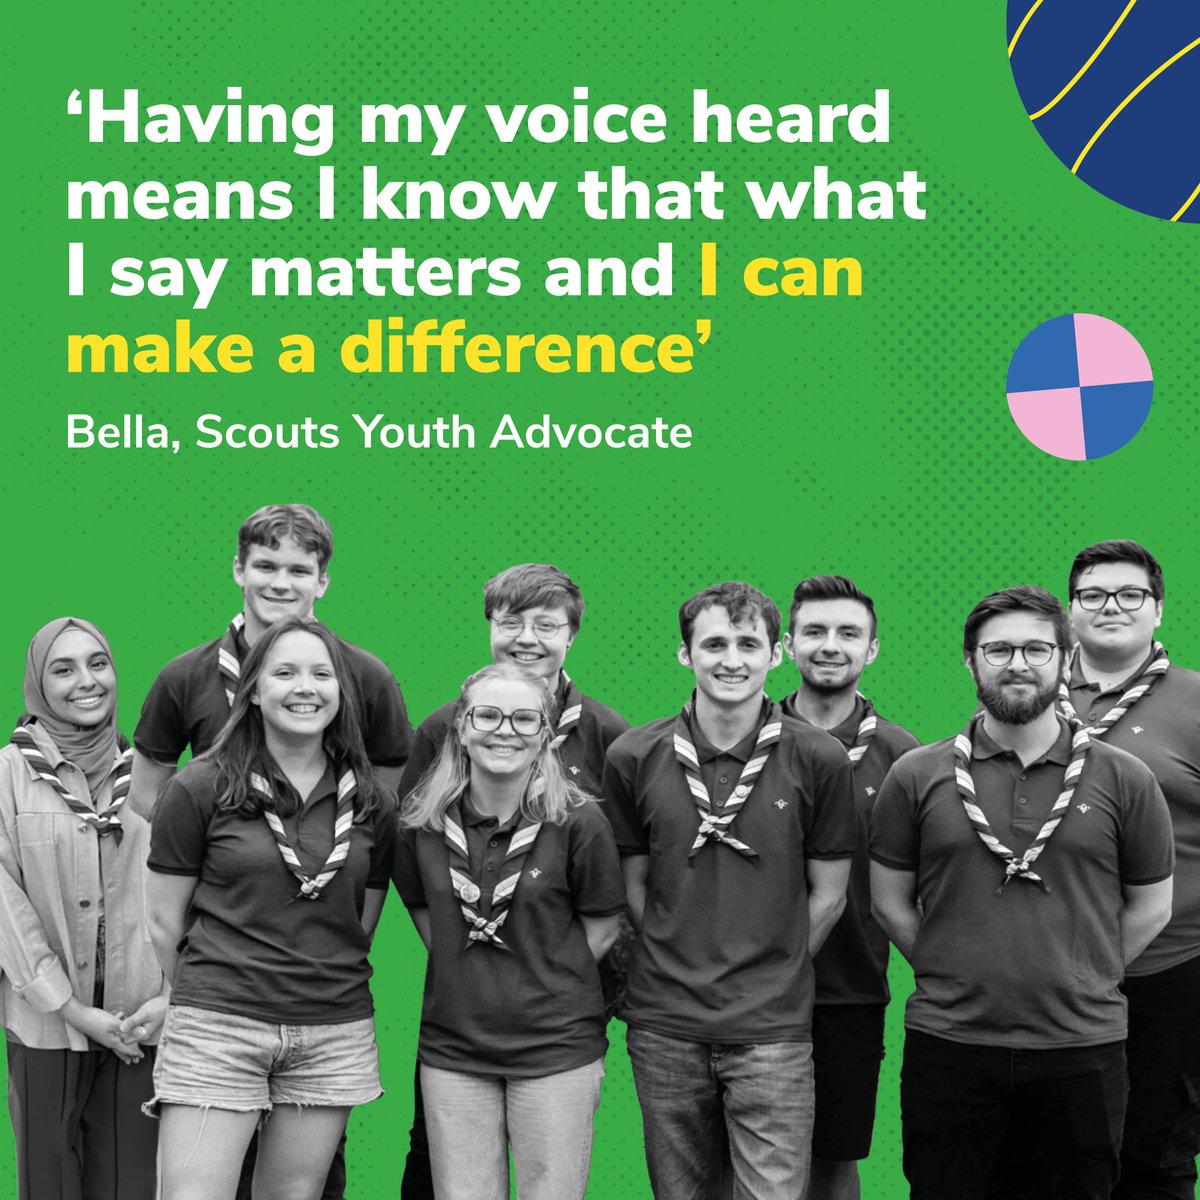 Calling Scouts aged 18-24! Our Youth Advocate recruitment is now open. Are you passionate about making a positive impact? Do you want to develop new skills? Are you enthusiastic about representing Scouts at national events? Apply now: bit.ly/3xXYRCC